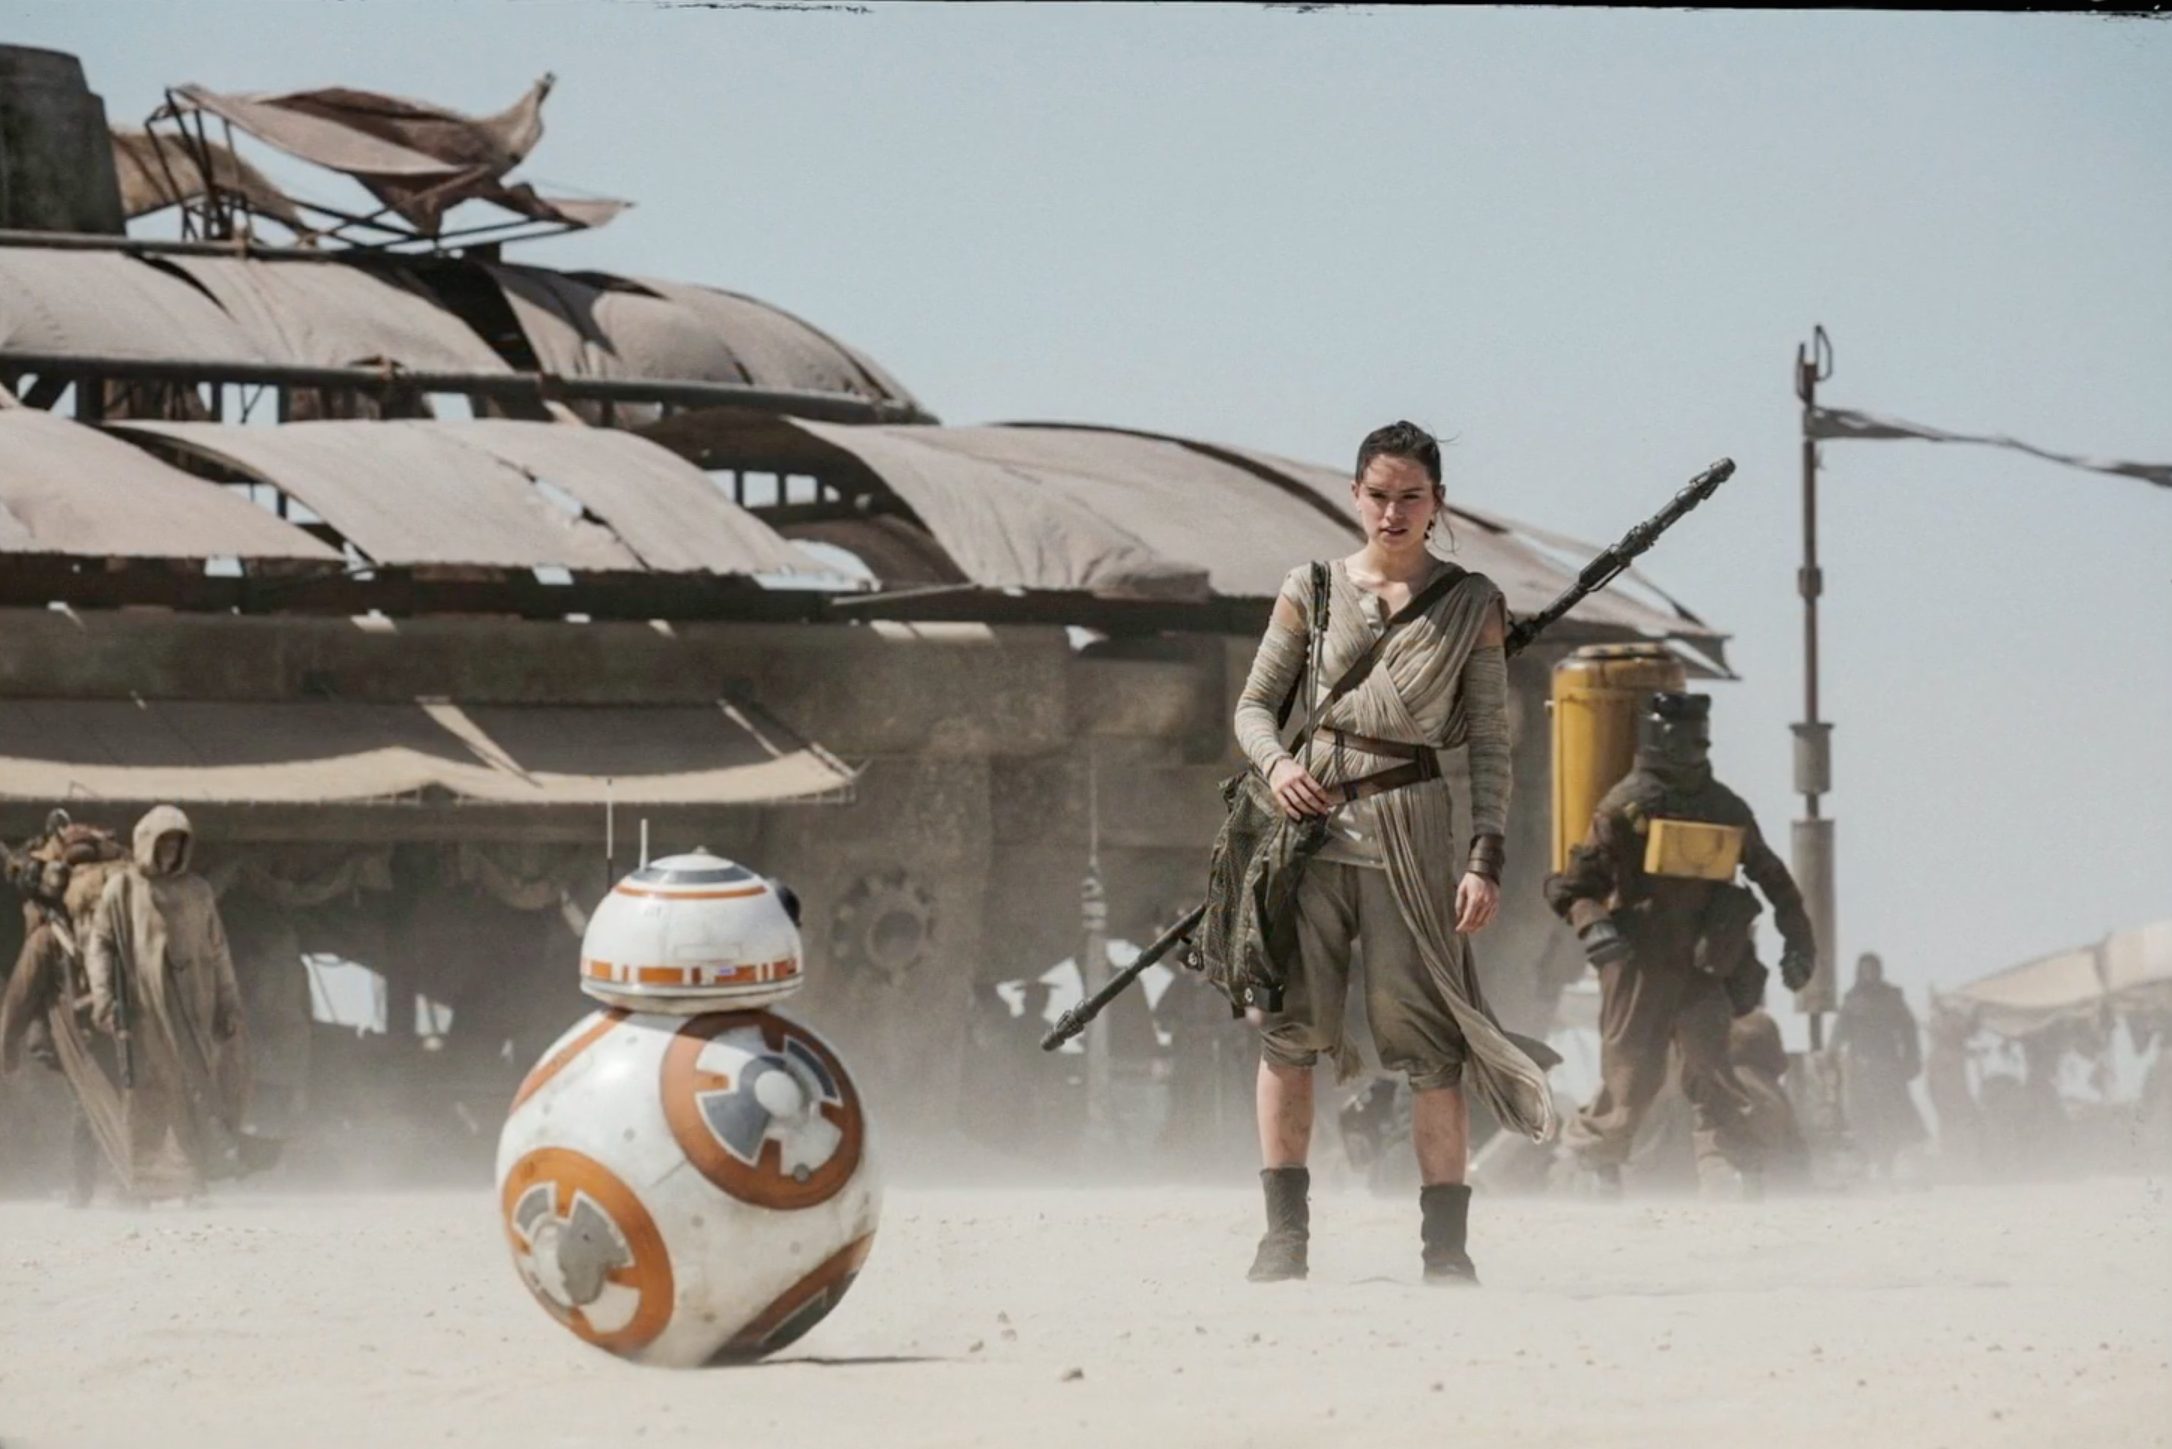 star wars force awakens review